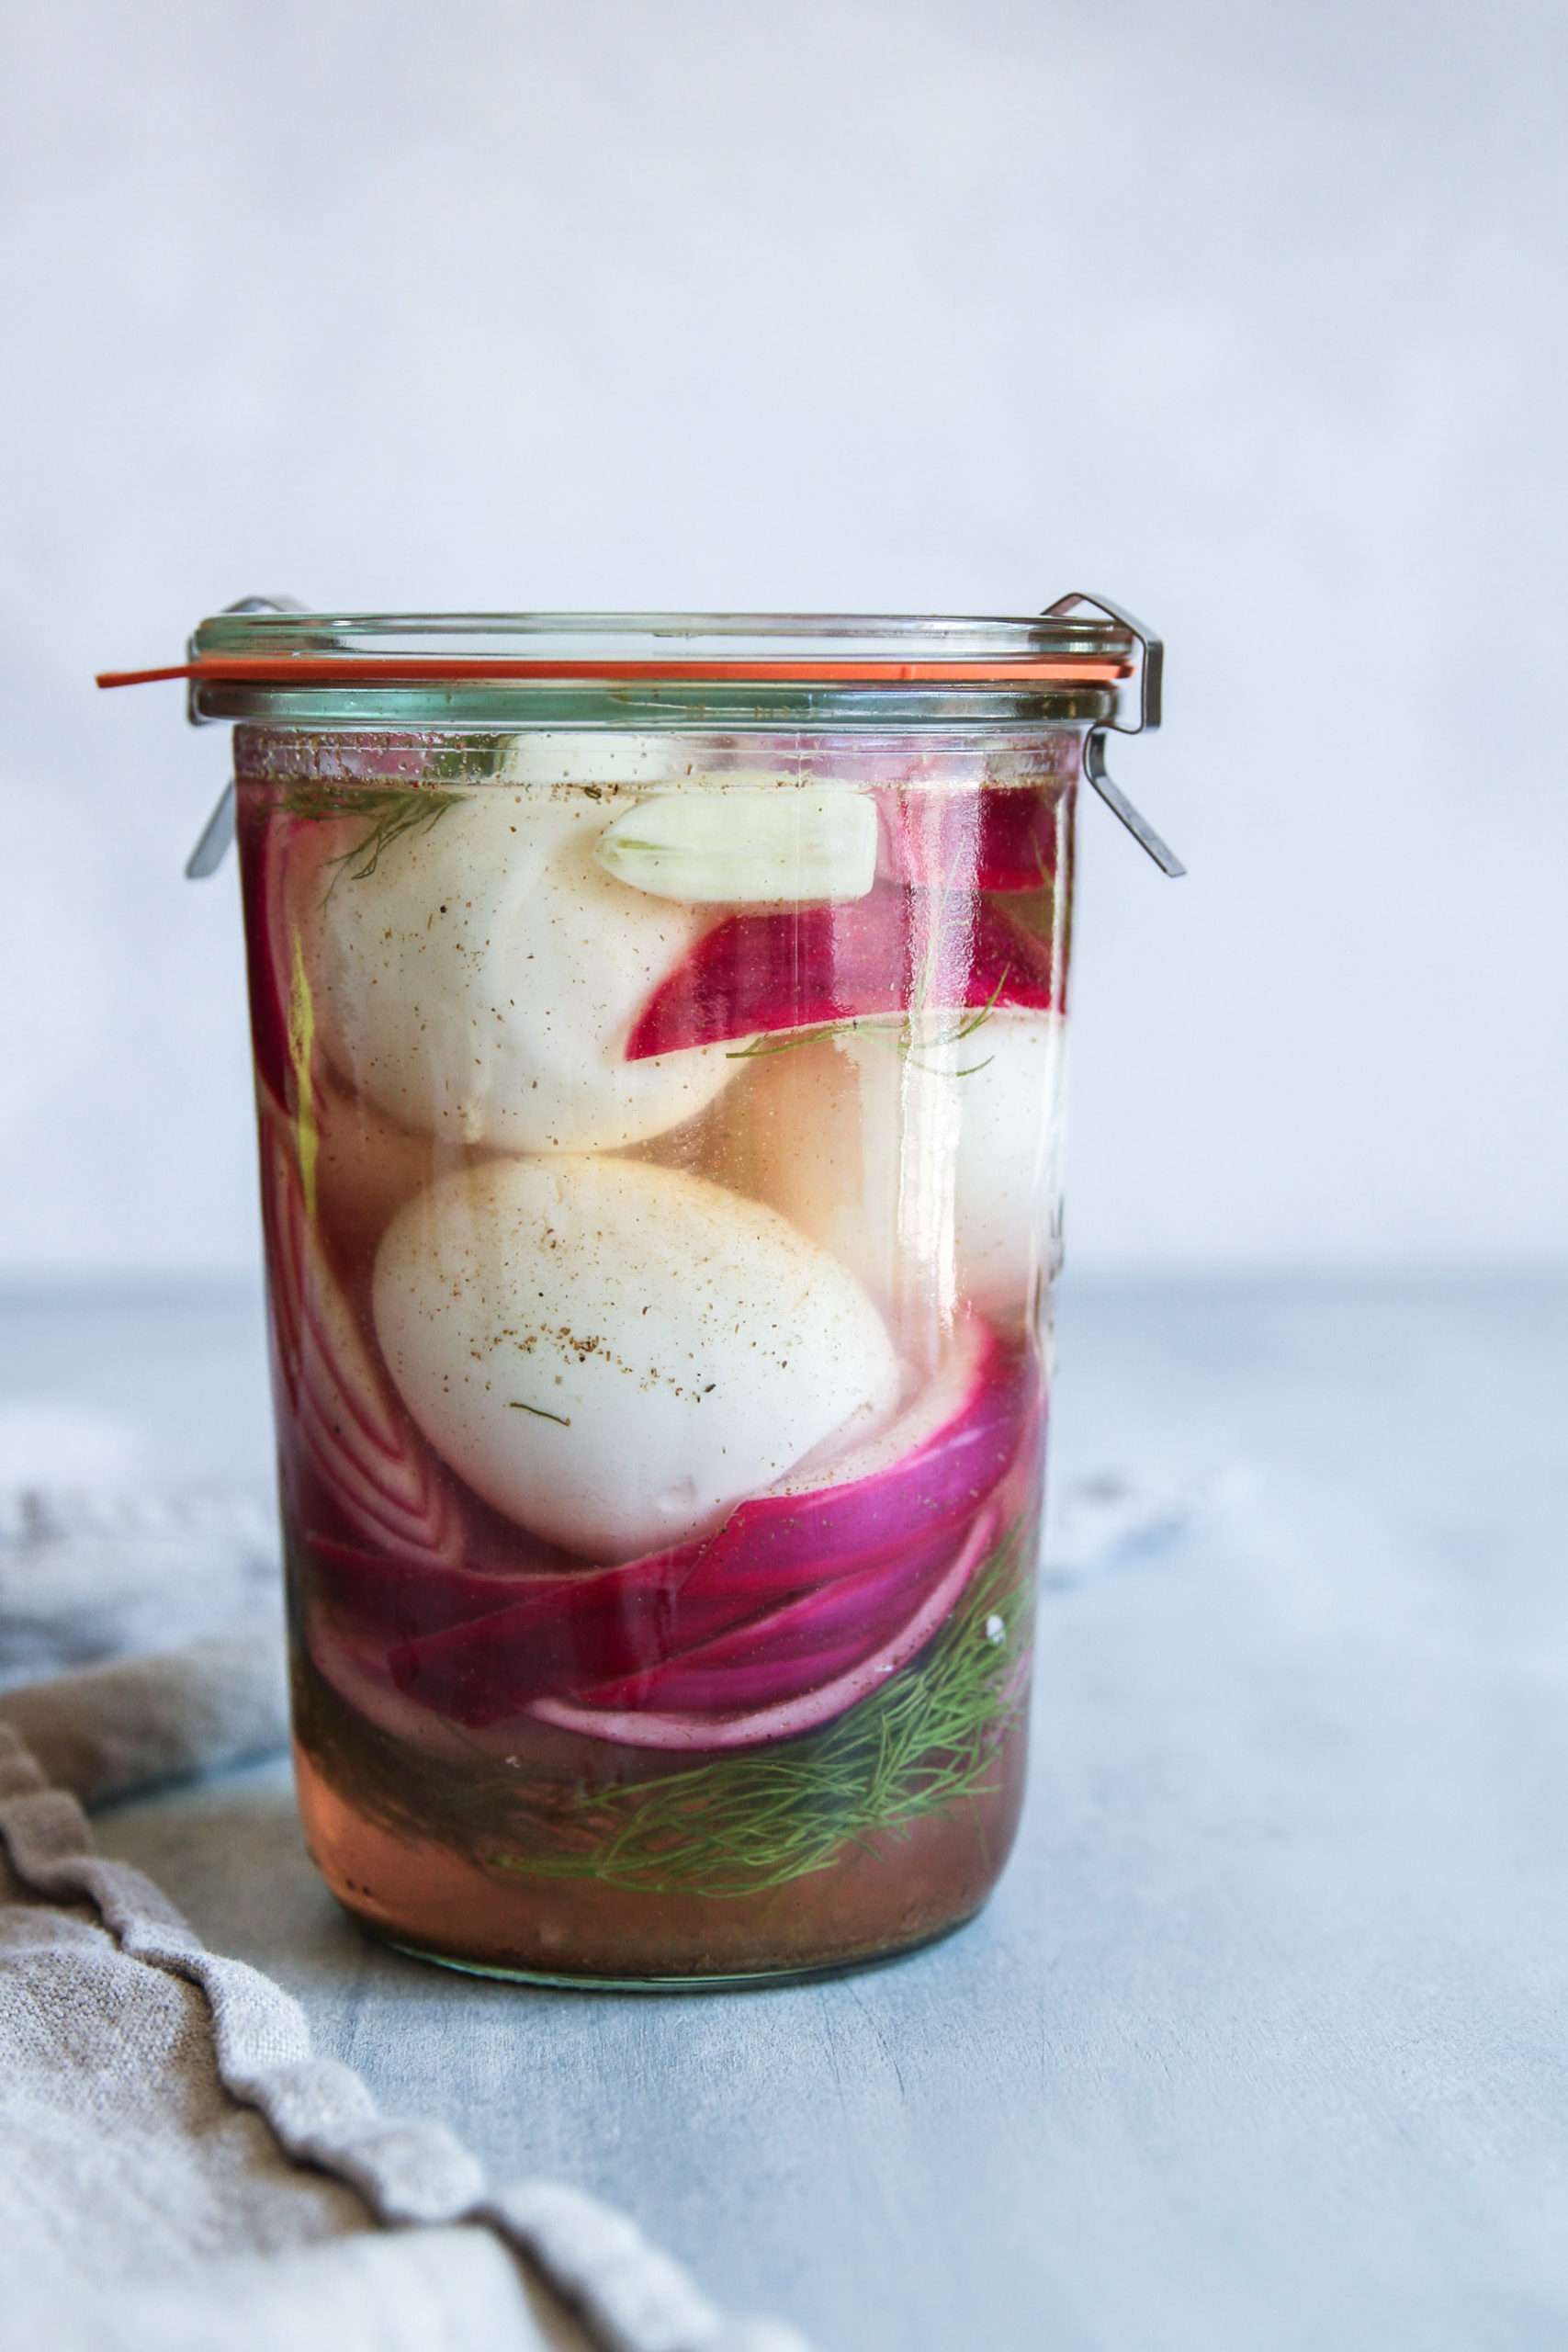 Pickled eggs with red onion slices in a Weck jar